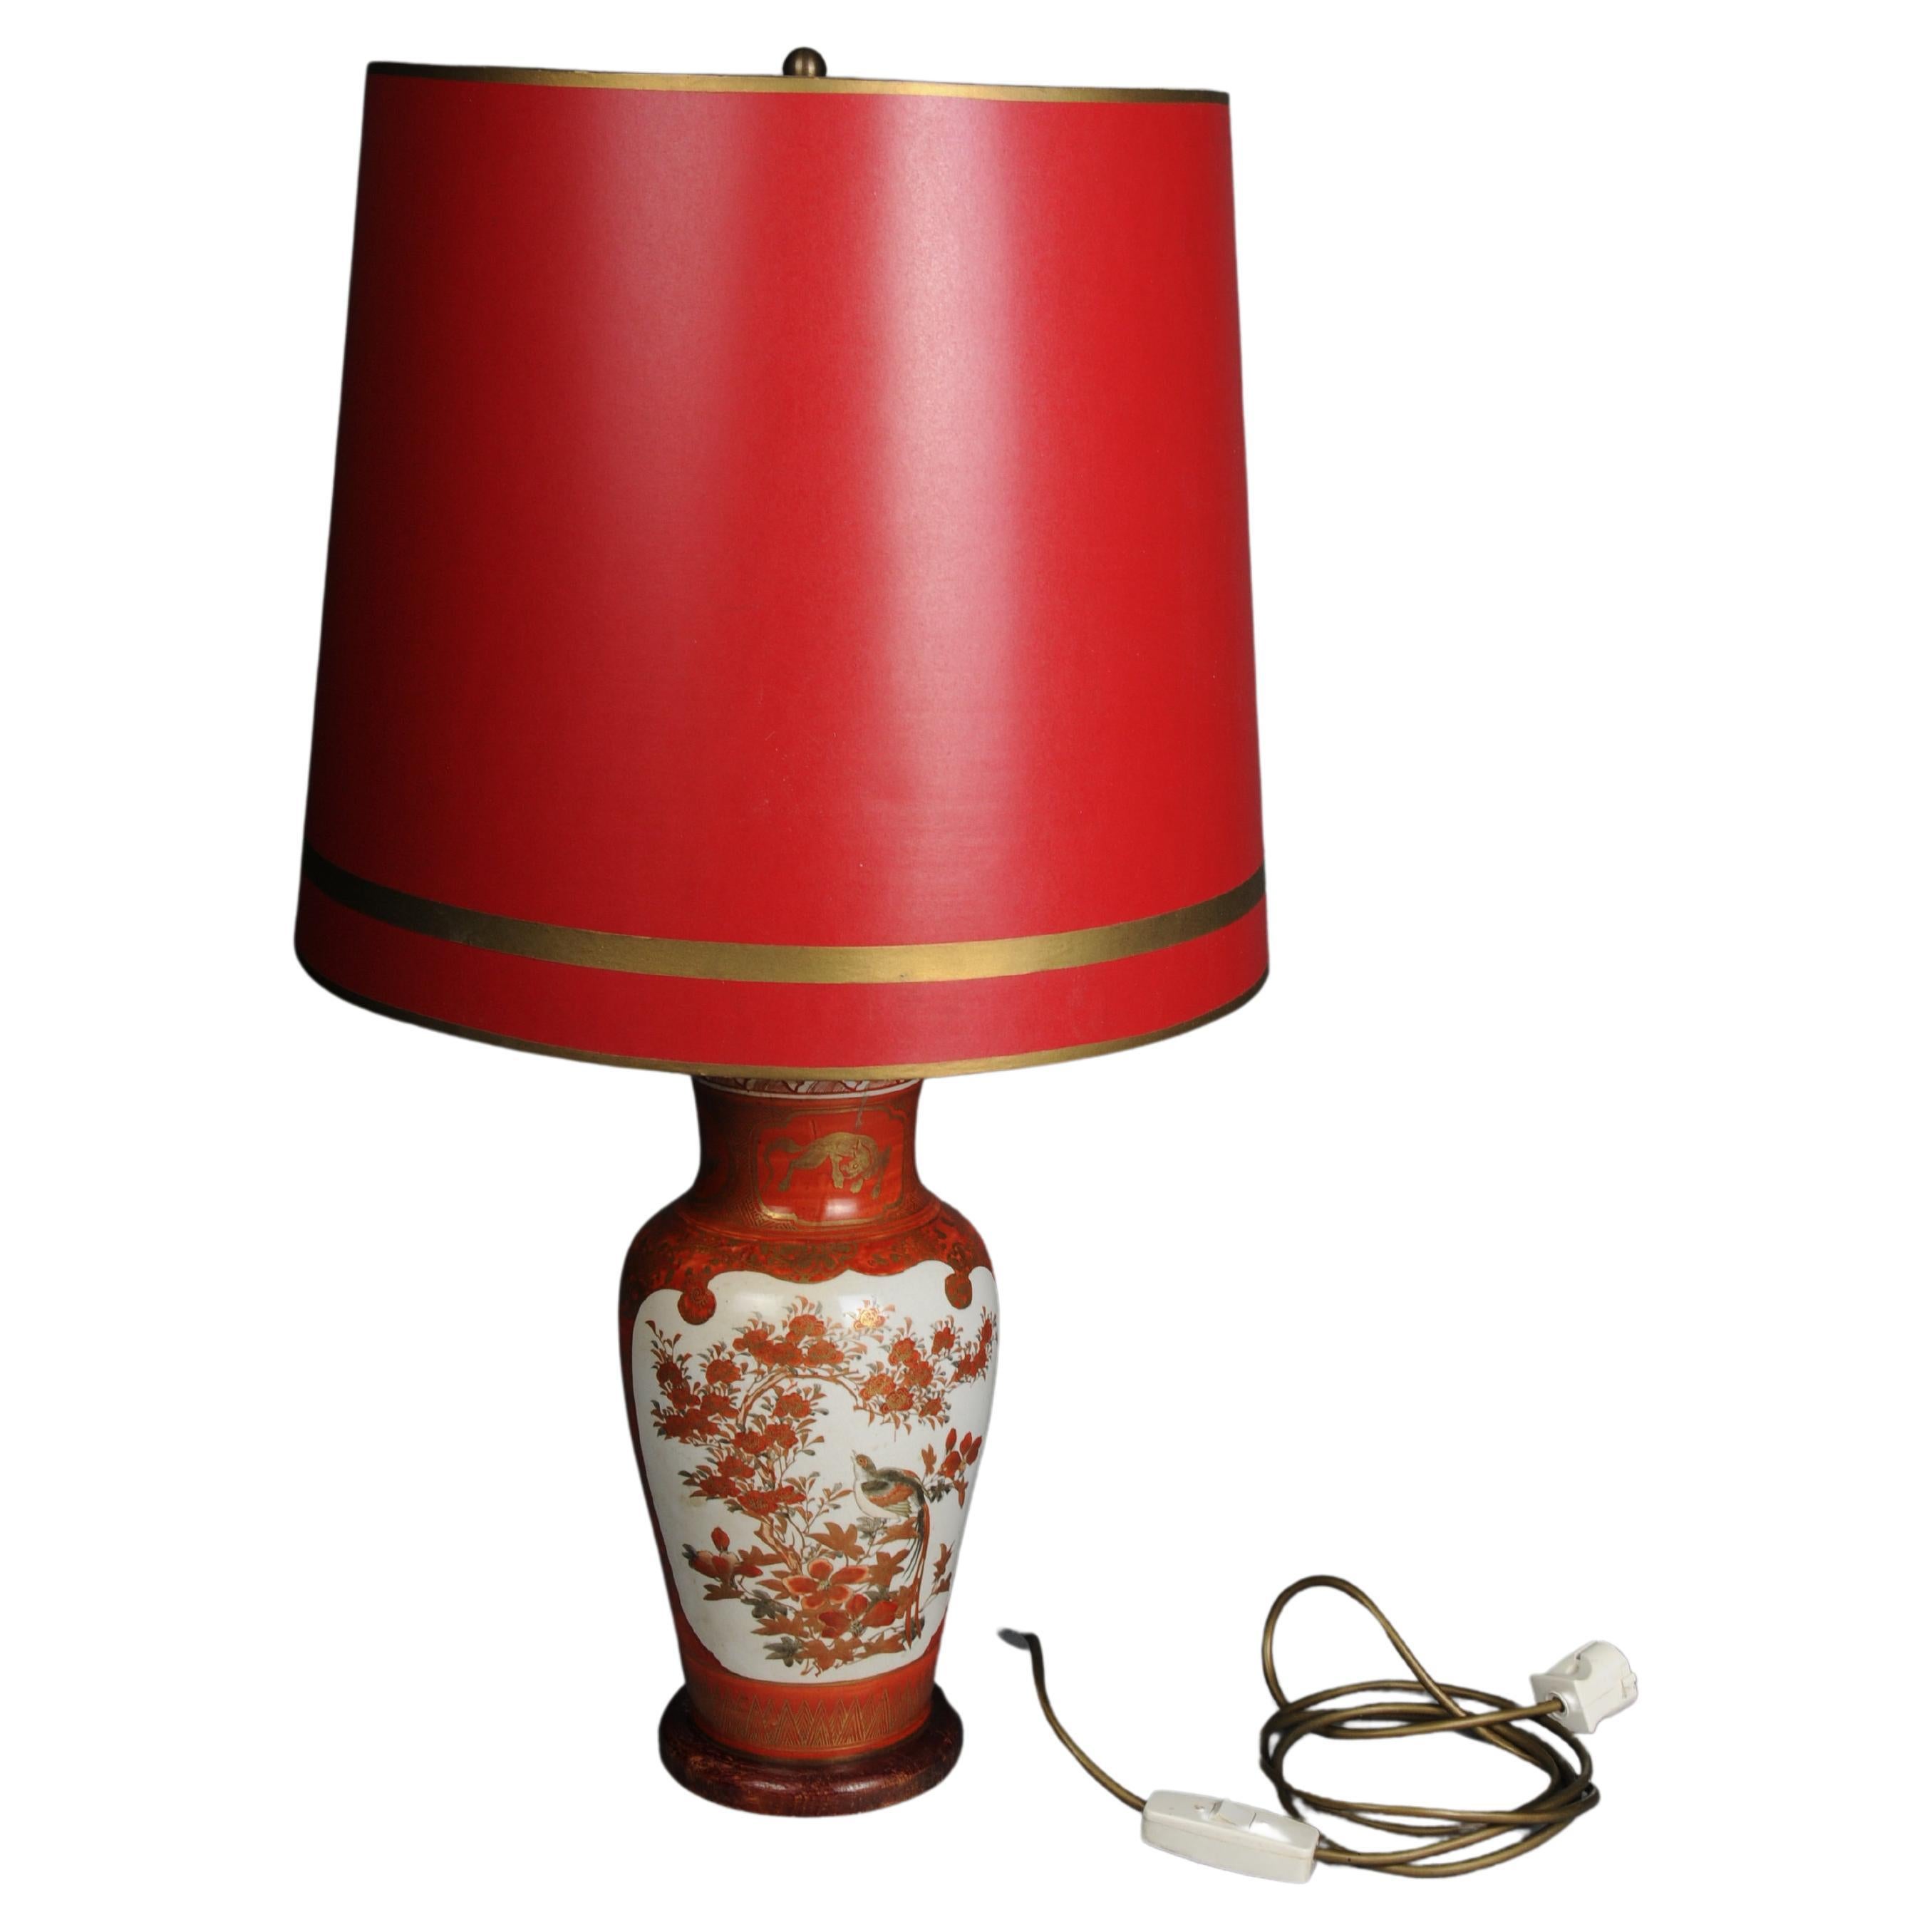 Old Asian porcelain table lamp, red with shade, electrified